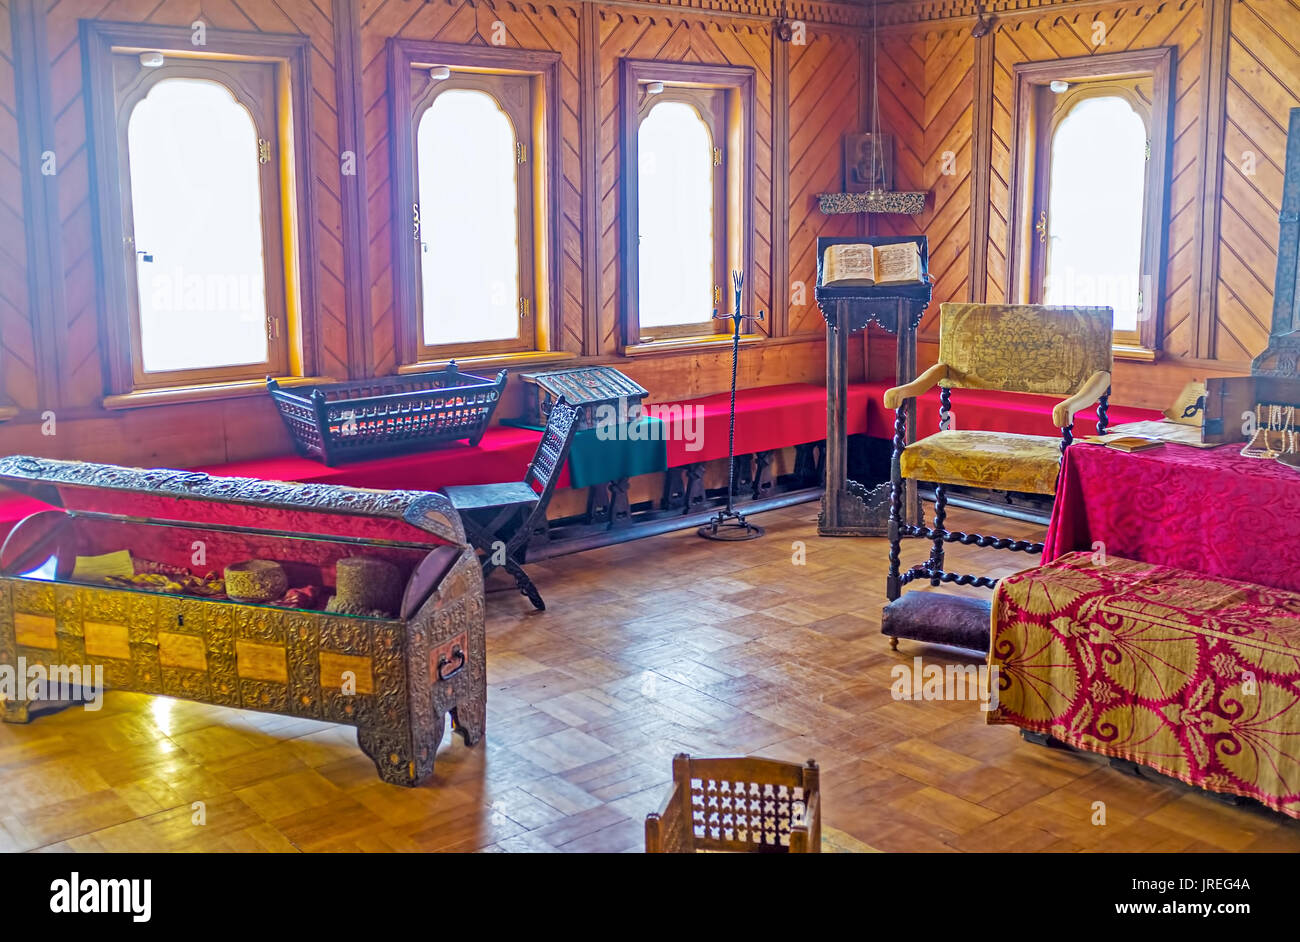 MOSCOW, RUSSIA - MAY 11, 2015: Cozy bright and warm Ladies Chamber in Palace of Romanov Boyar is a perfect place for needlework and playing with kids, Stock Photo